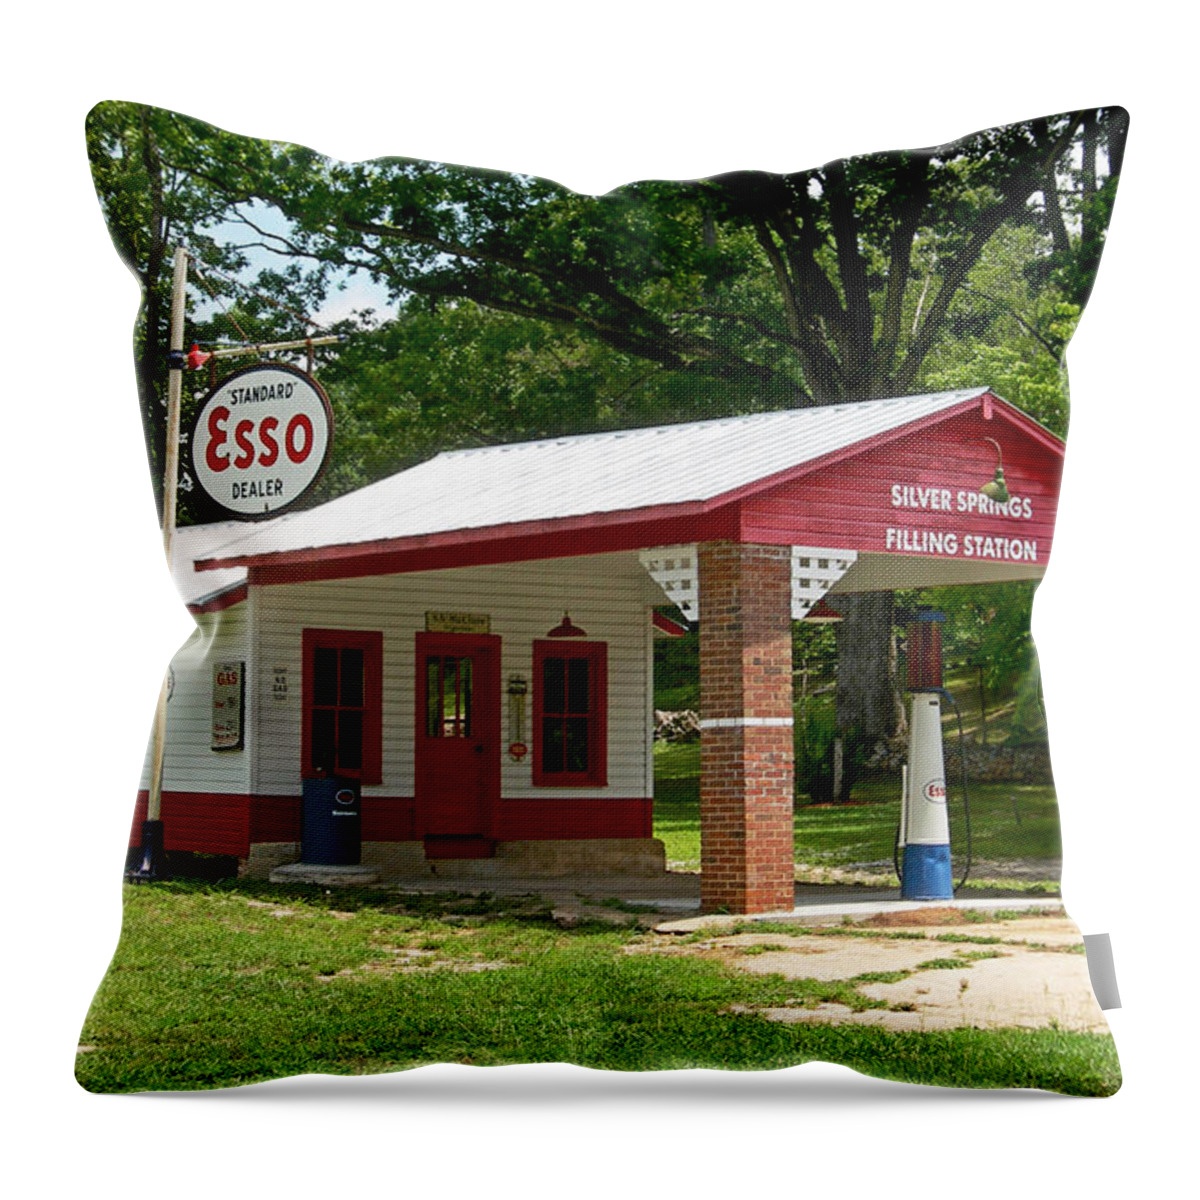 Esso Filling Station Throw Pillow featuring the photograph Esso Station by Greg Joens